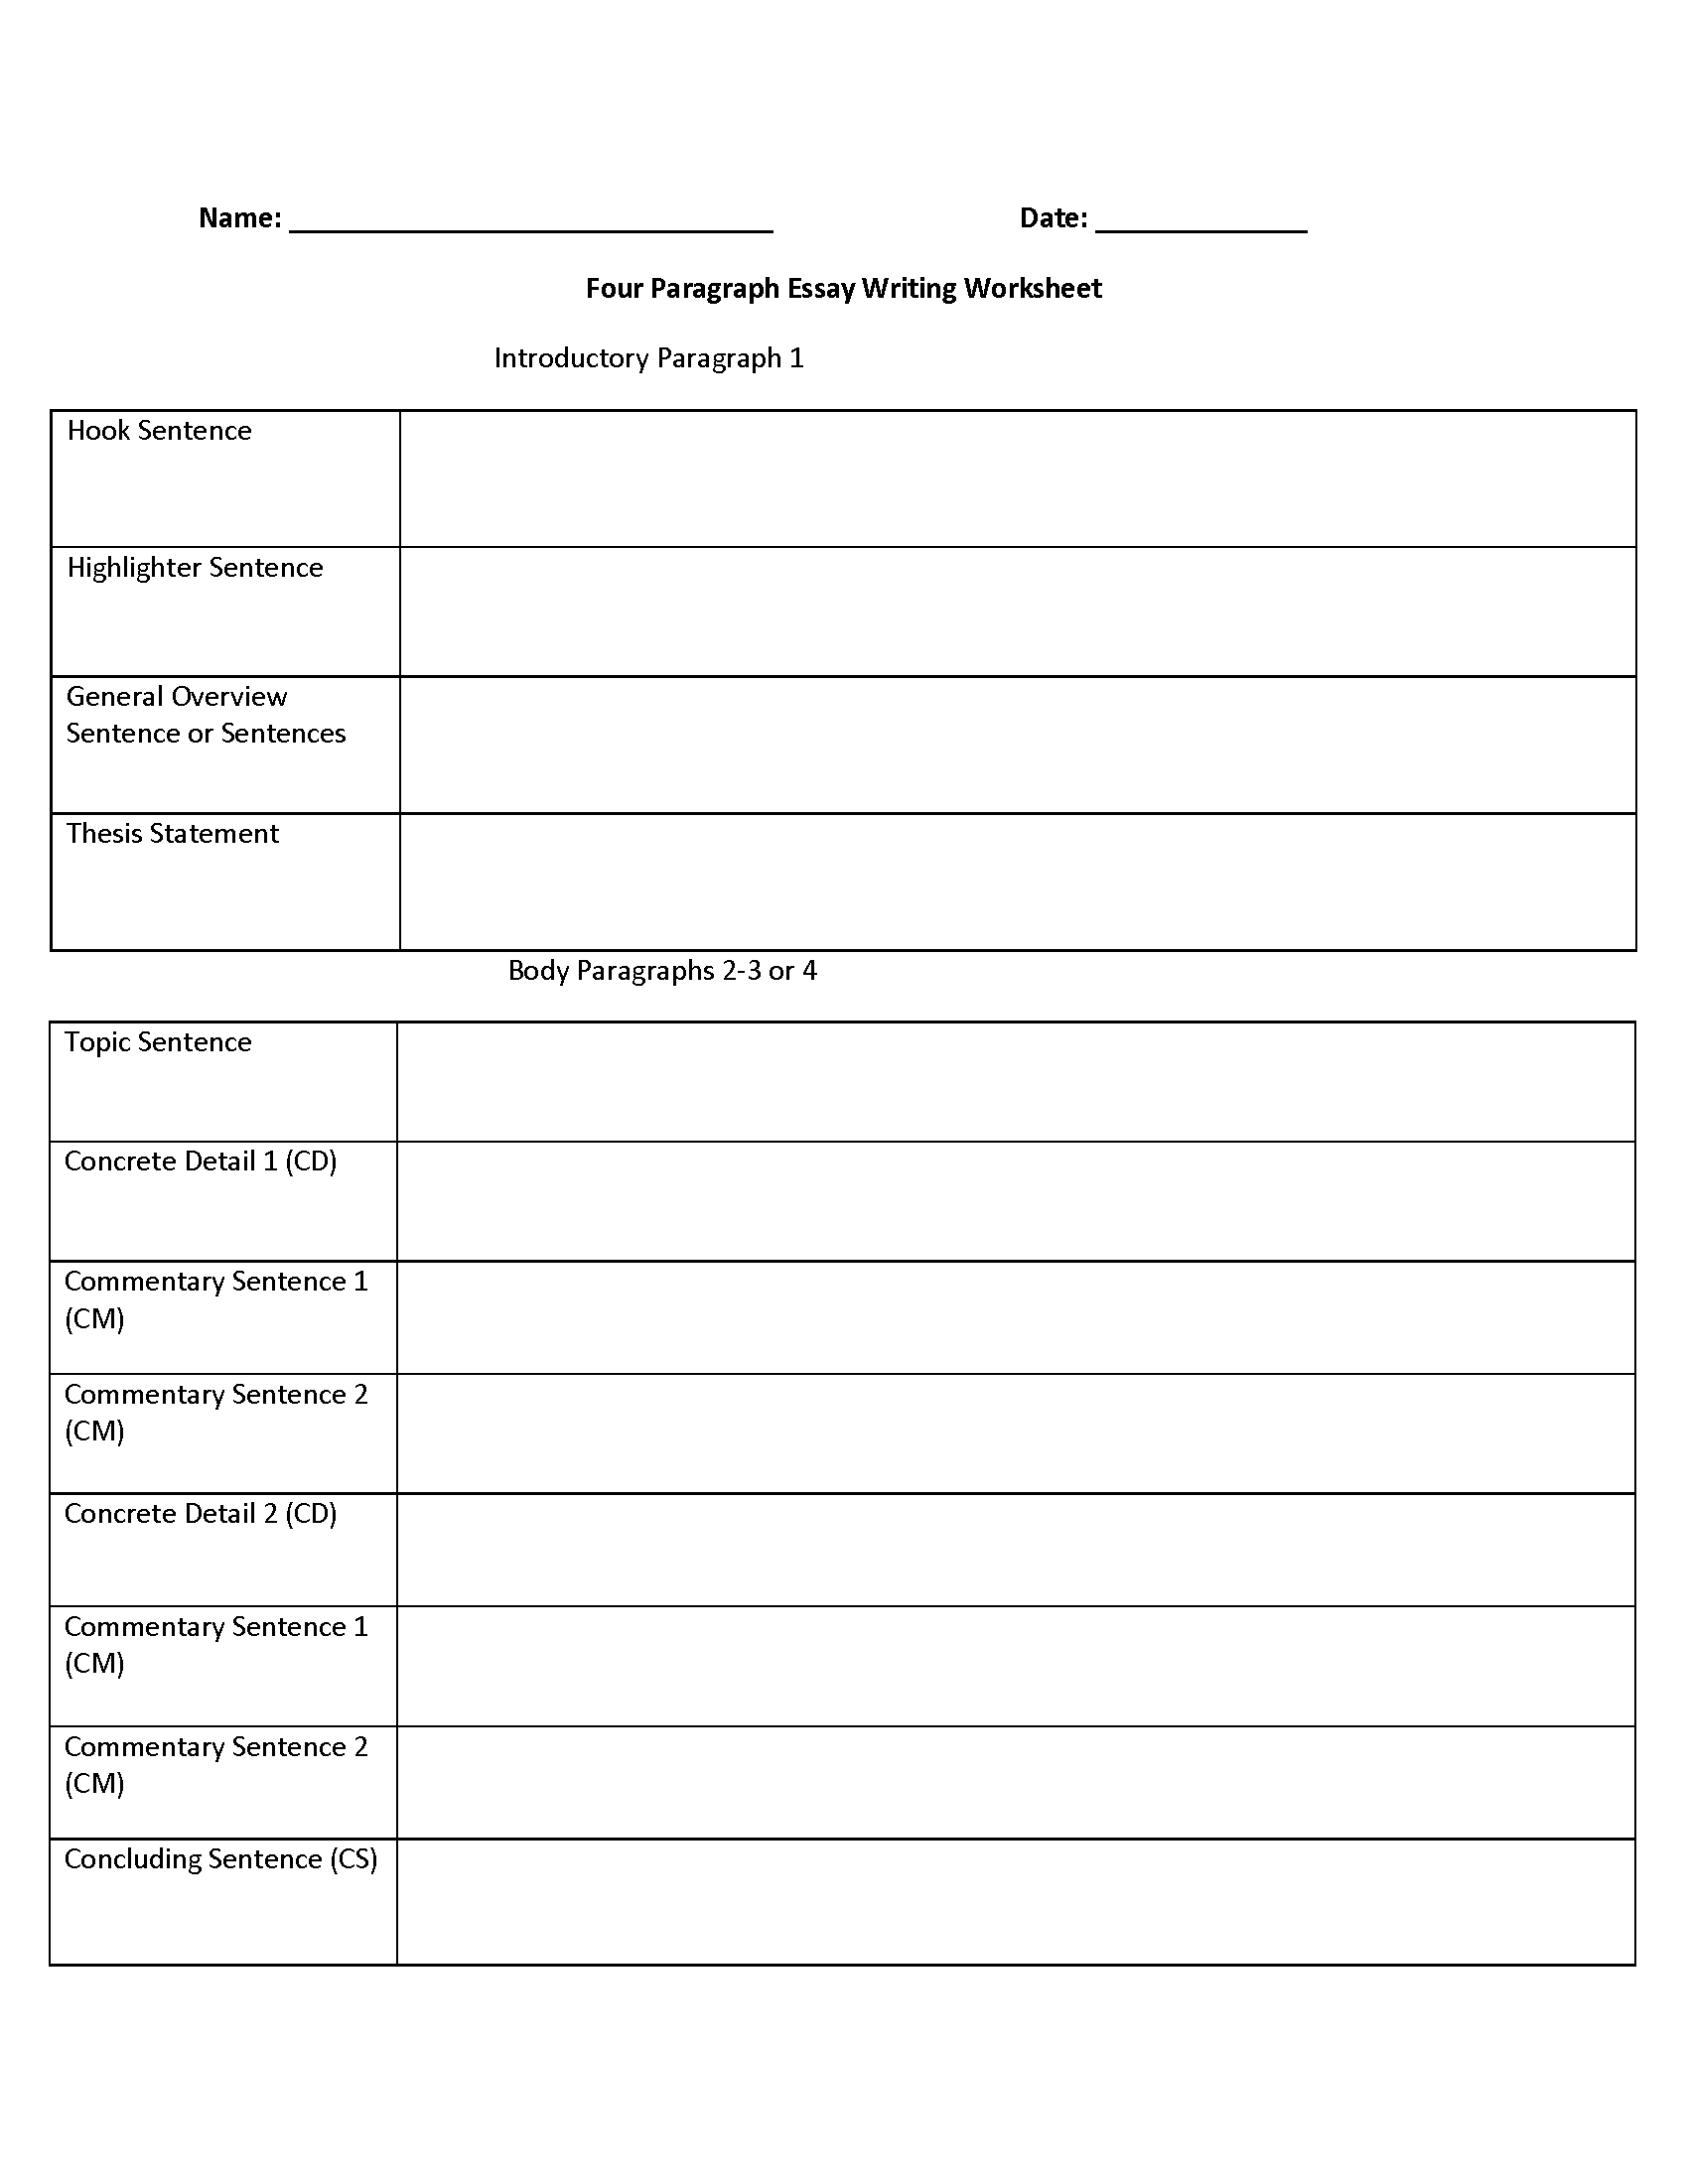 Four Paragraph Graphic Organizers Worksheets